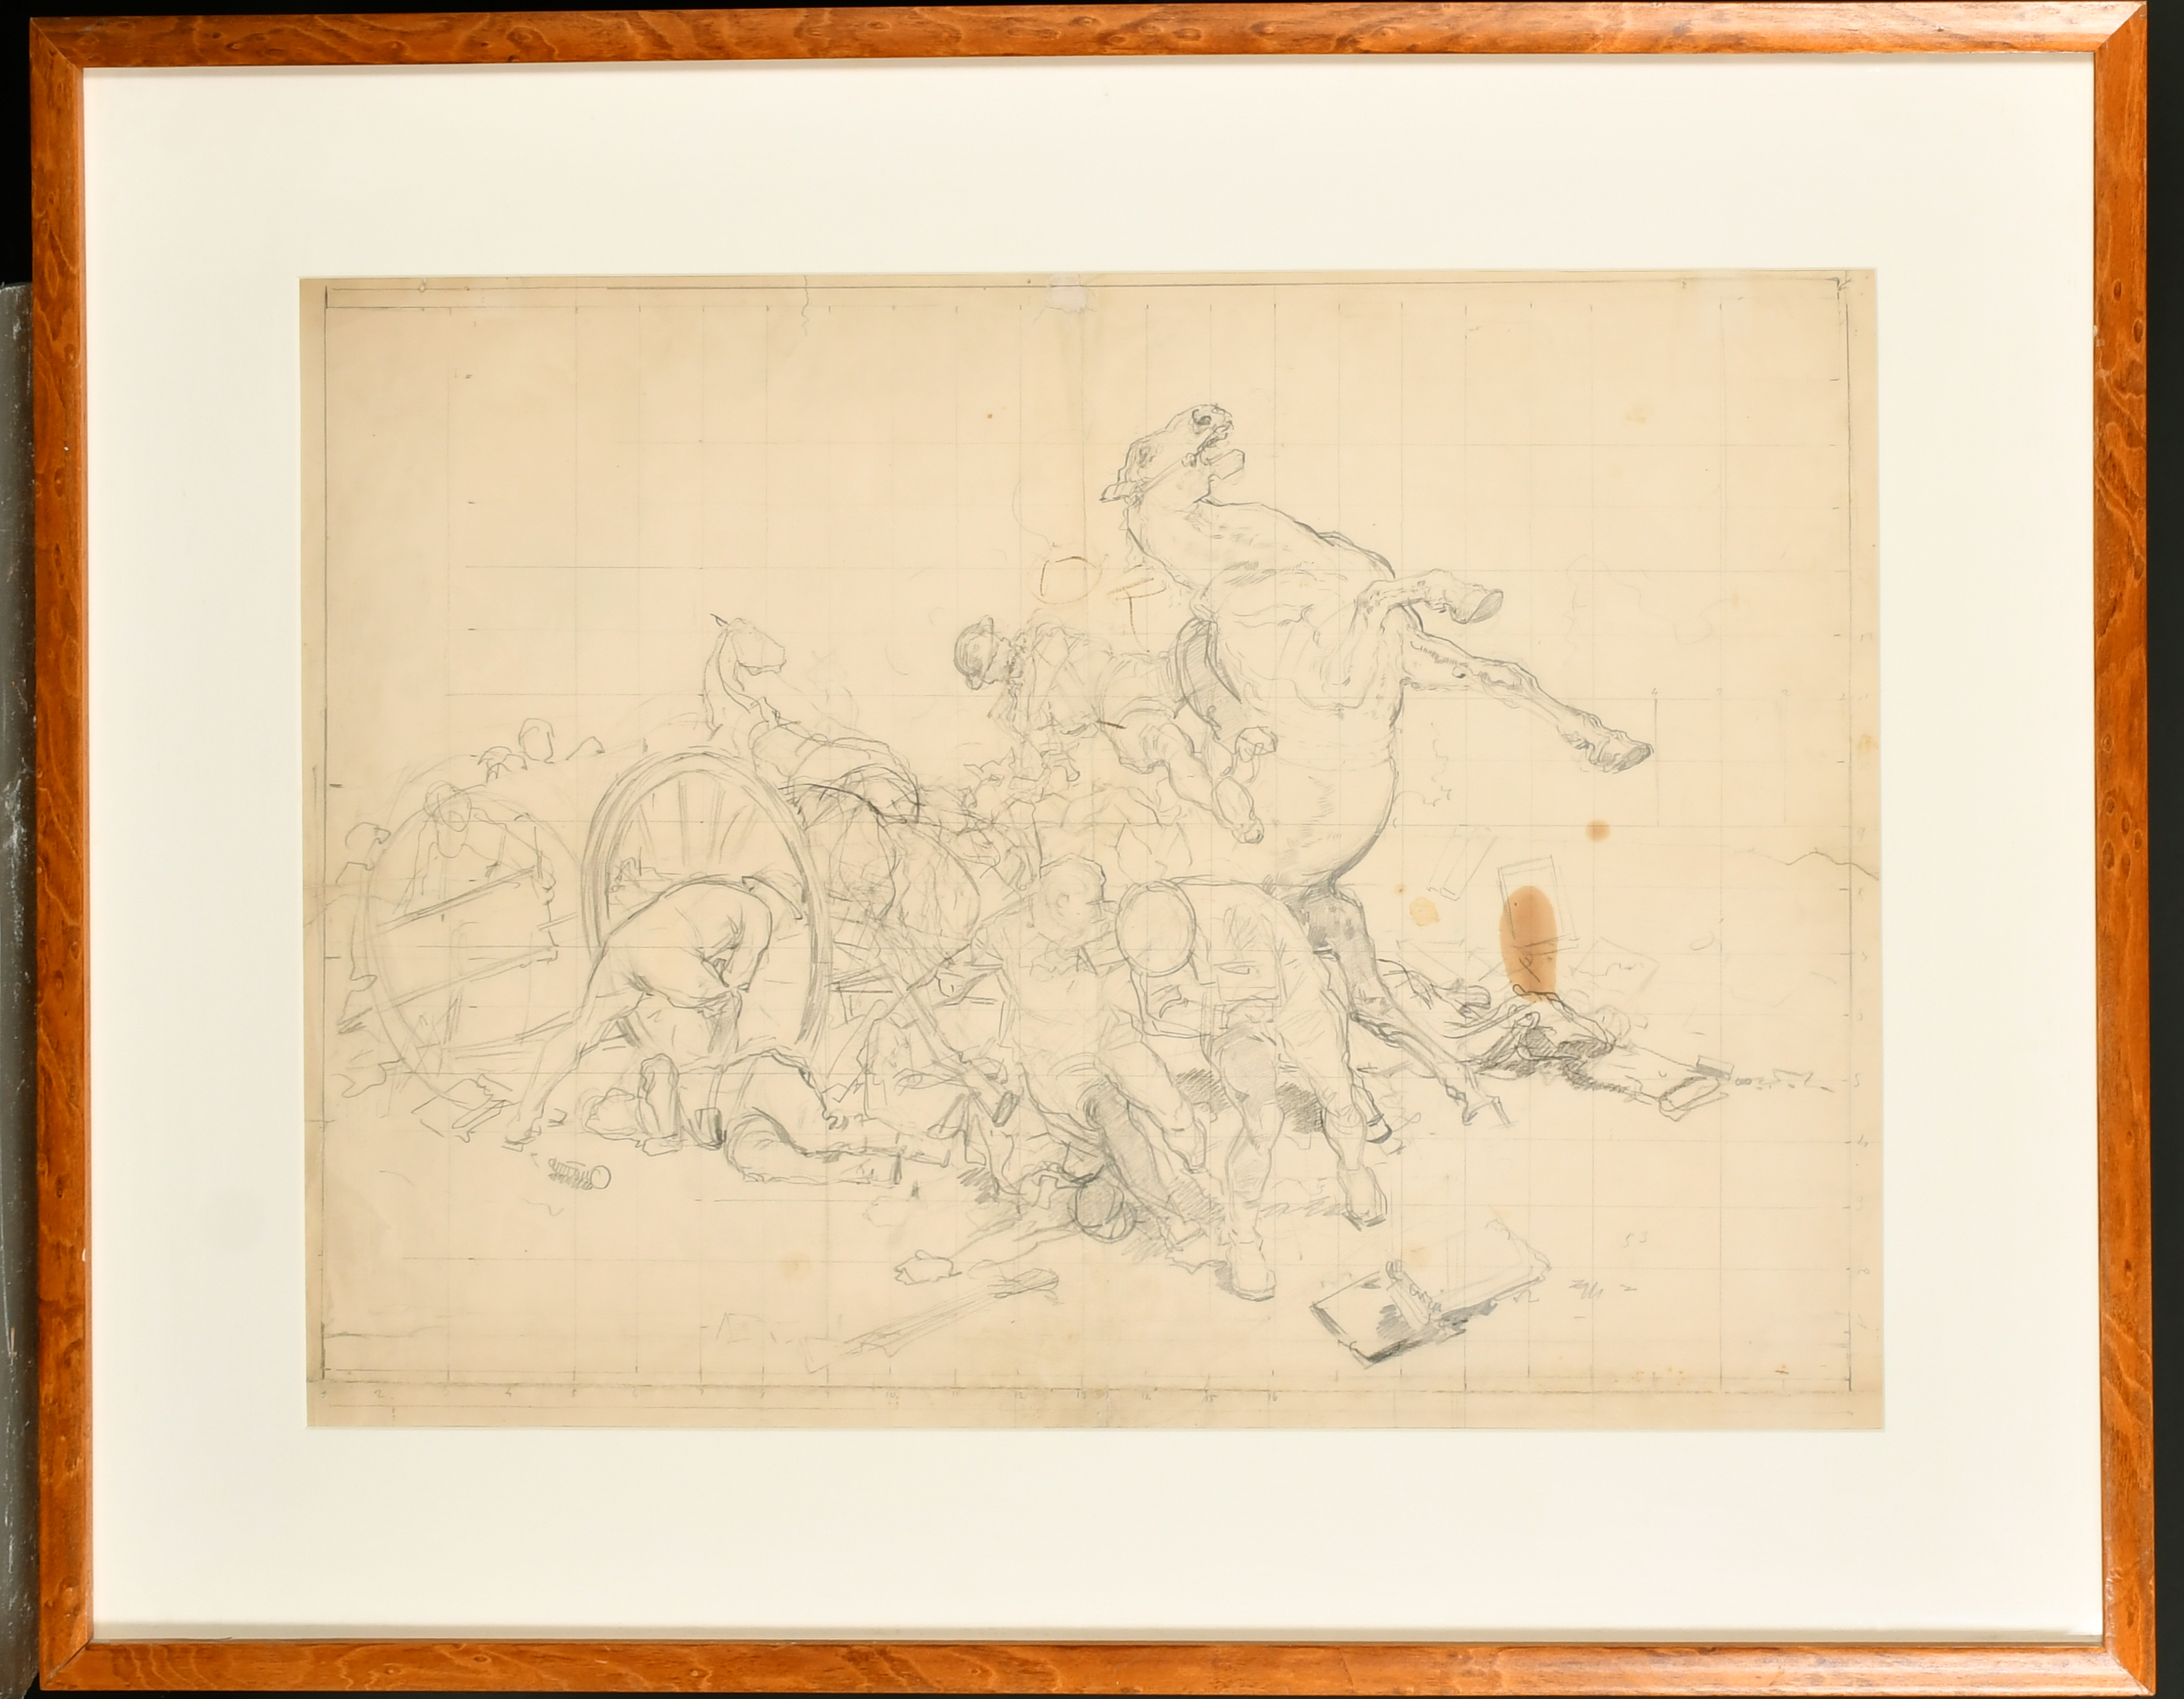 Fortunino Matania (1881-1963) Italian. "A Battery Shelled (a Study for War Memorial)", Pencil with - Image 2 of 5